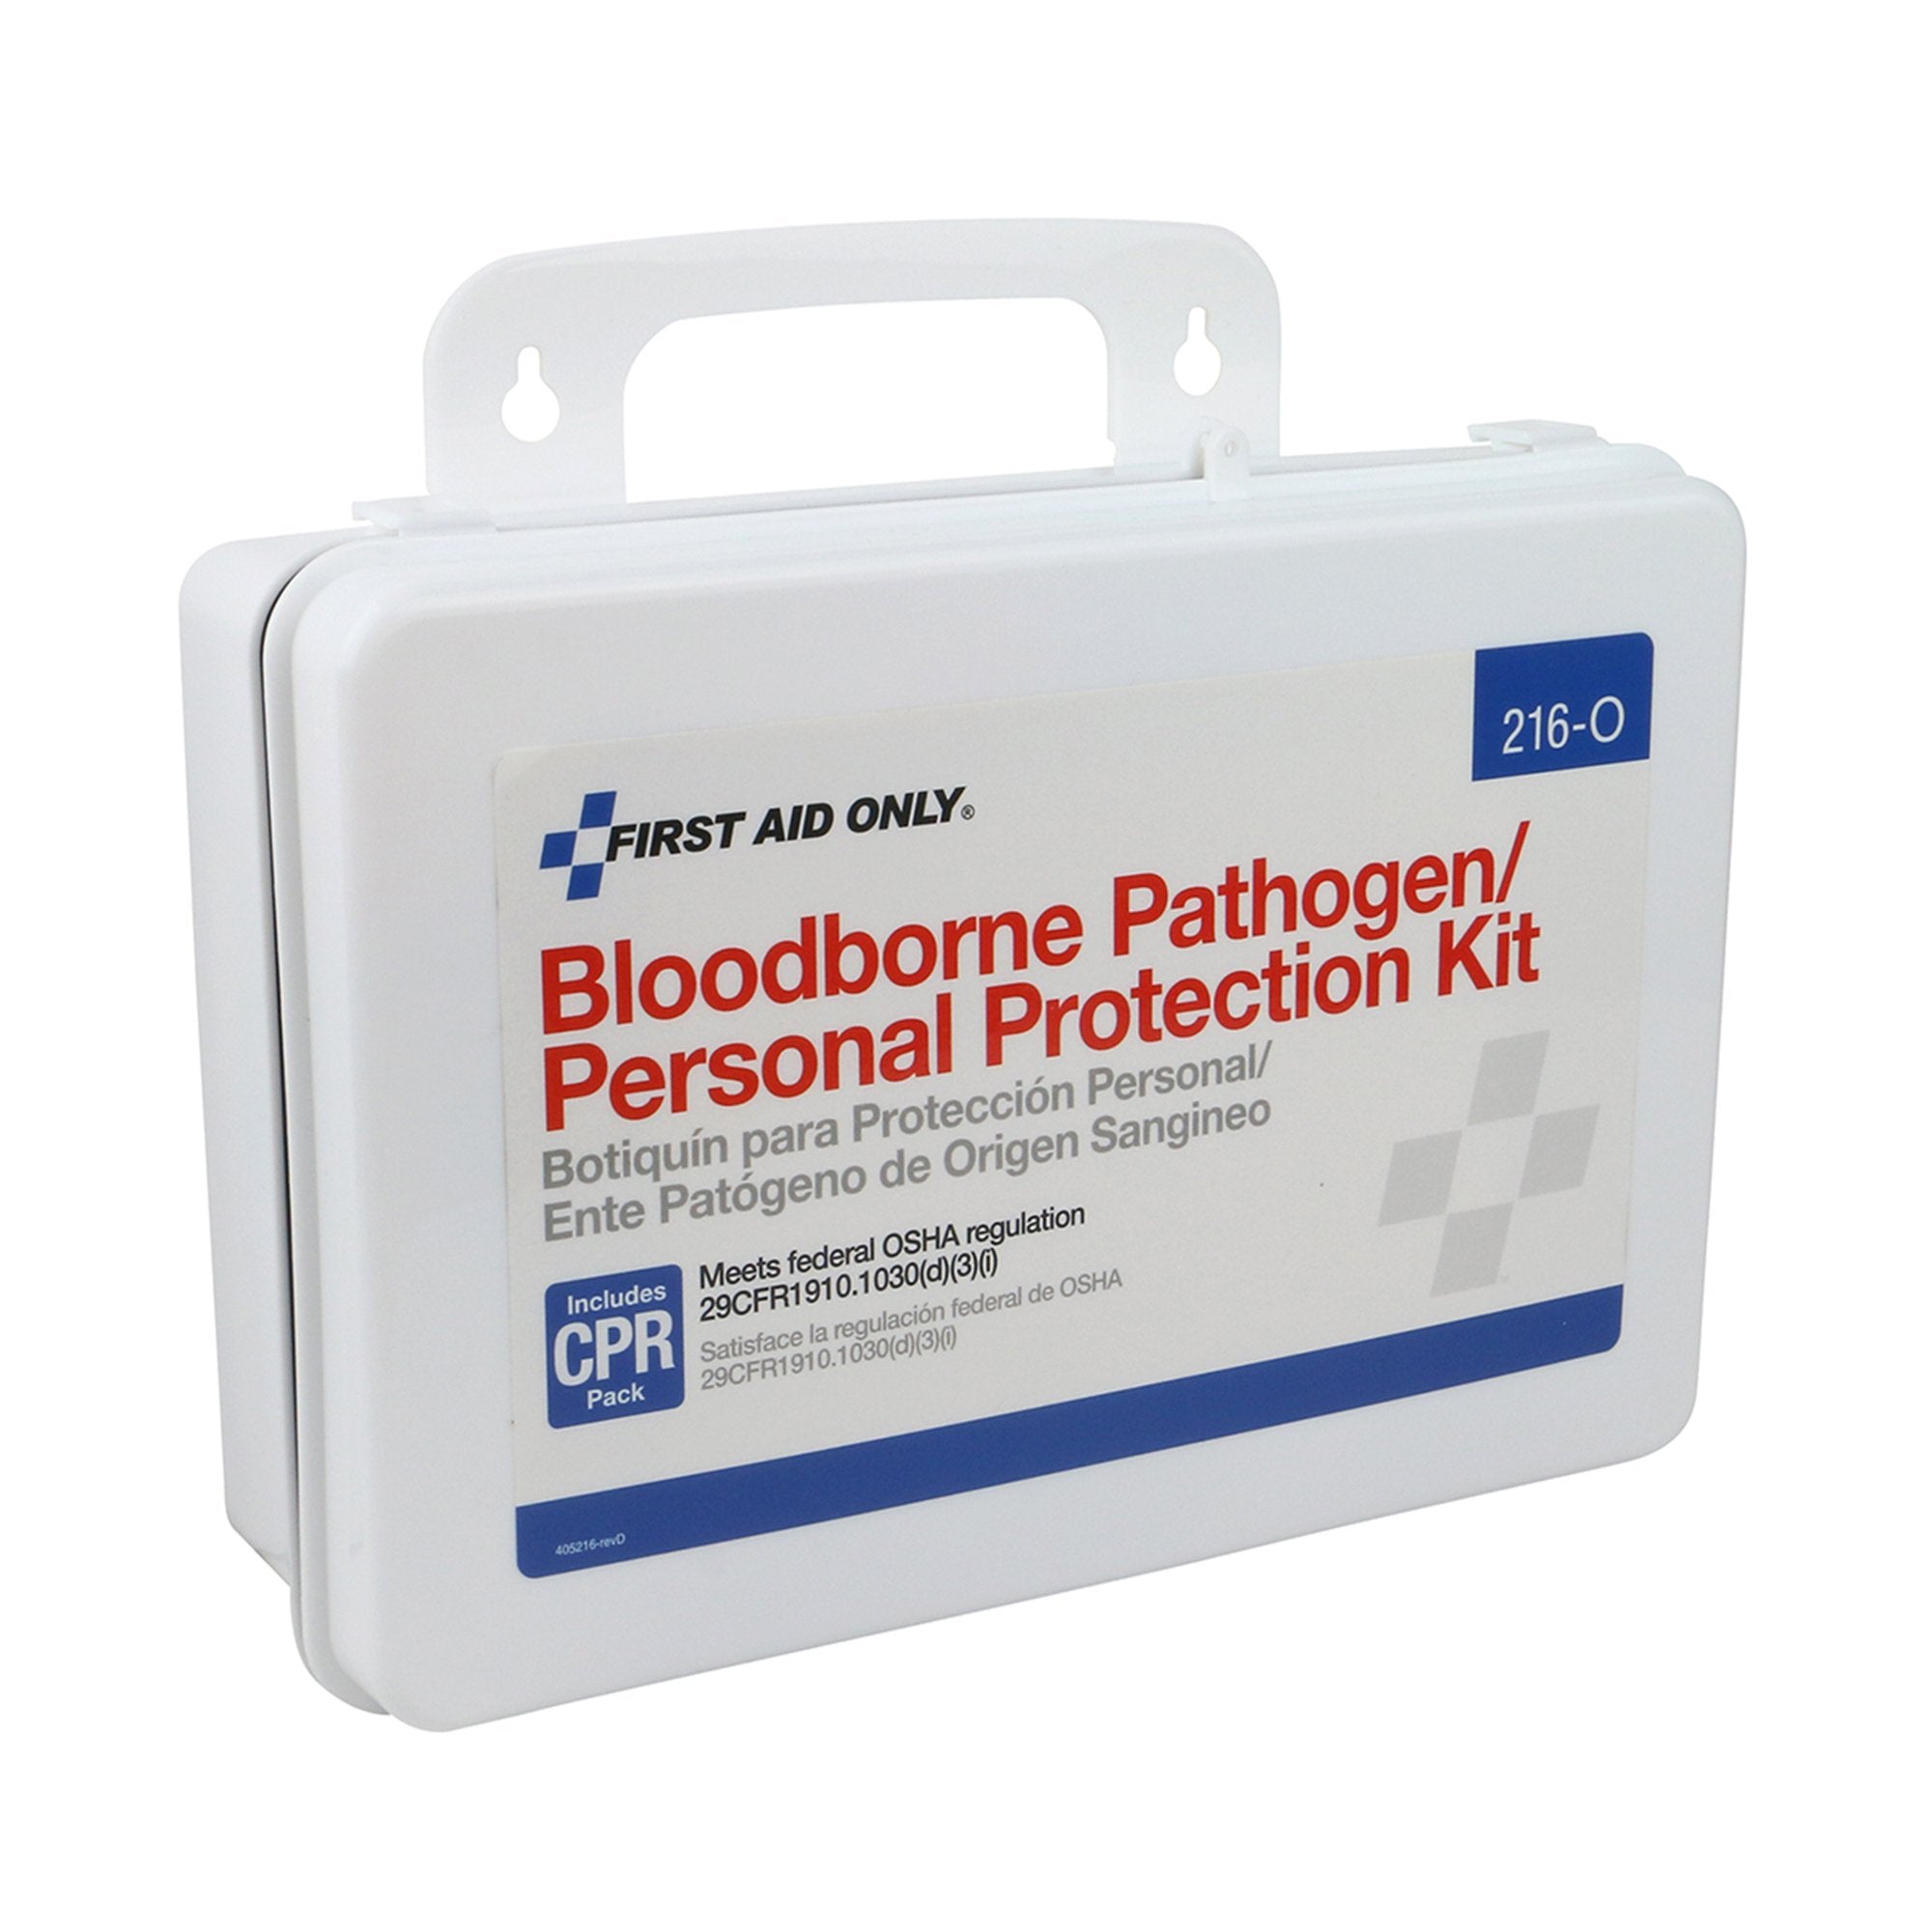 Bloodborne Pathogen Spill Clean Up / Personal Protection With CPR Pack Kit First Aid Only